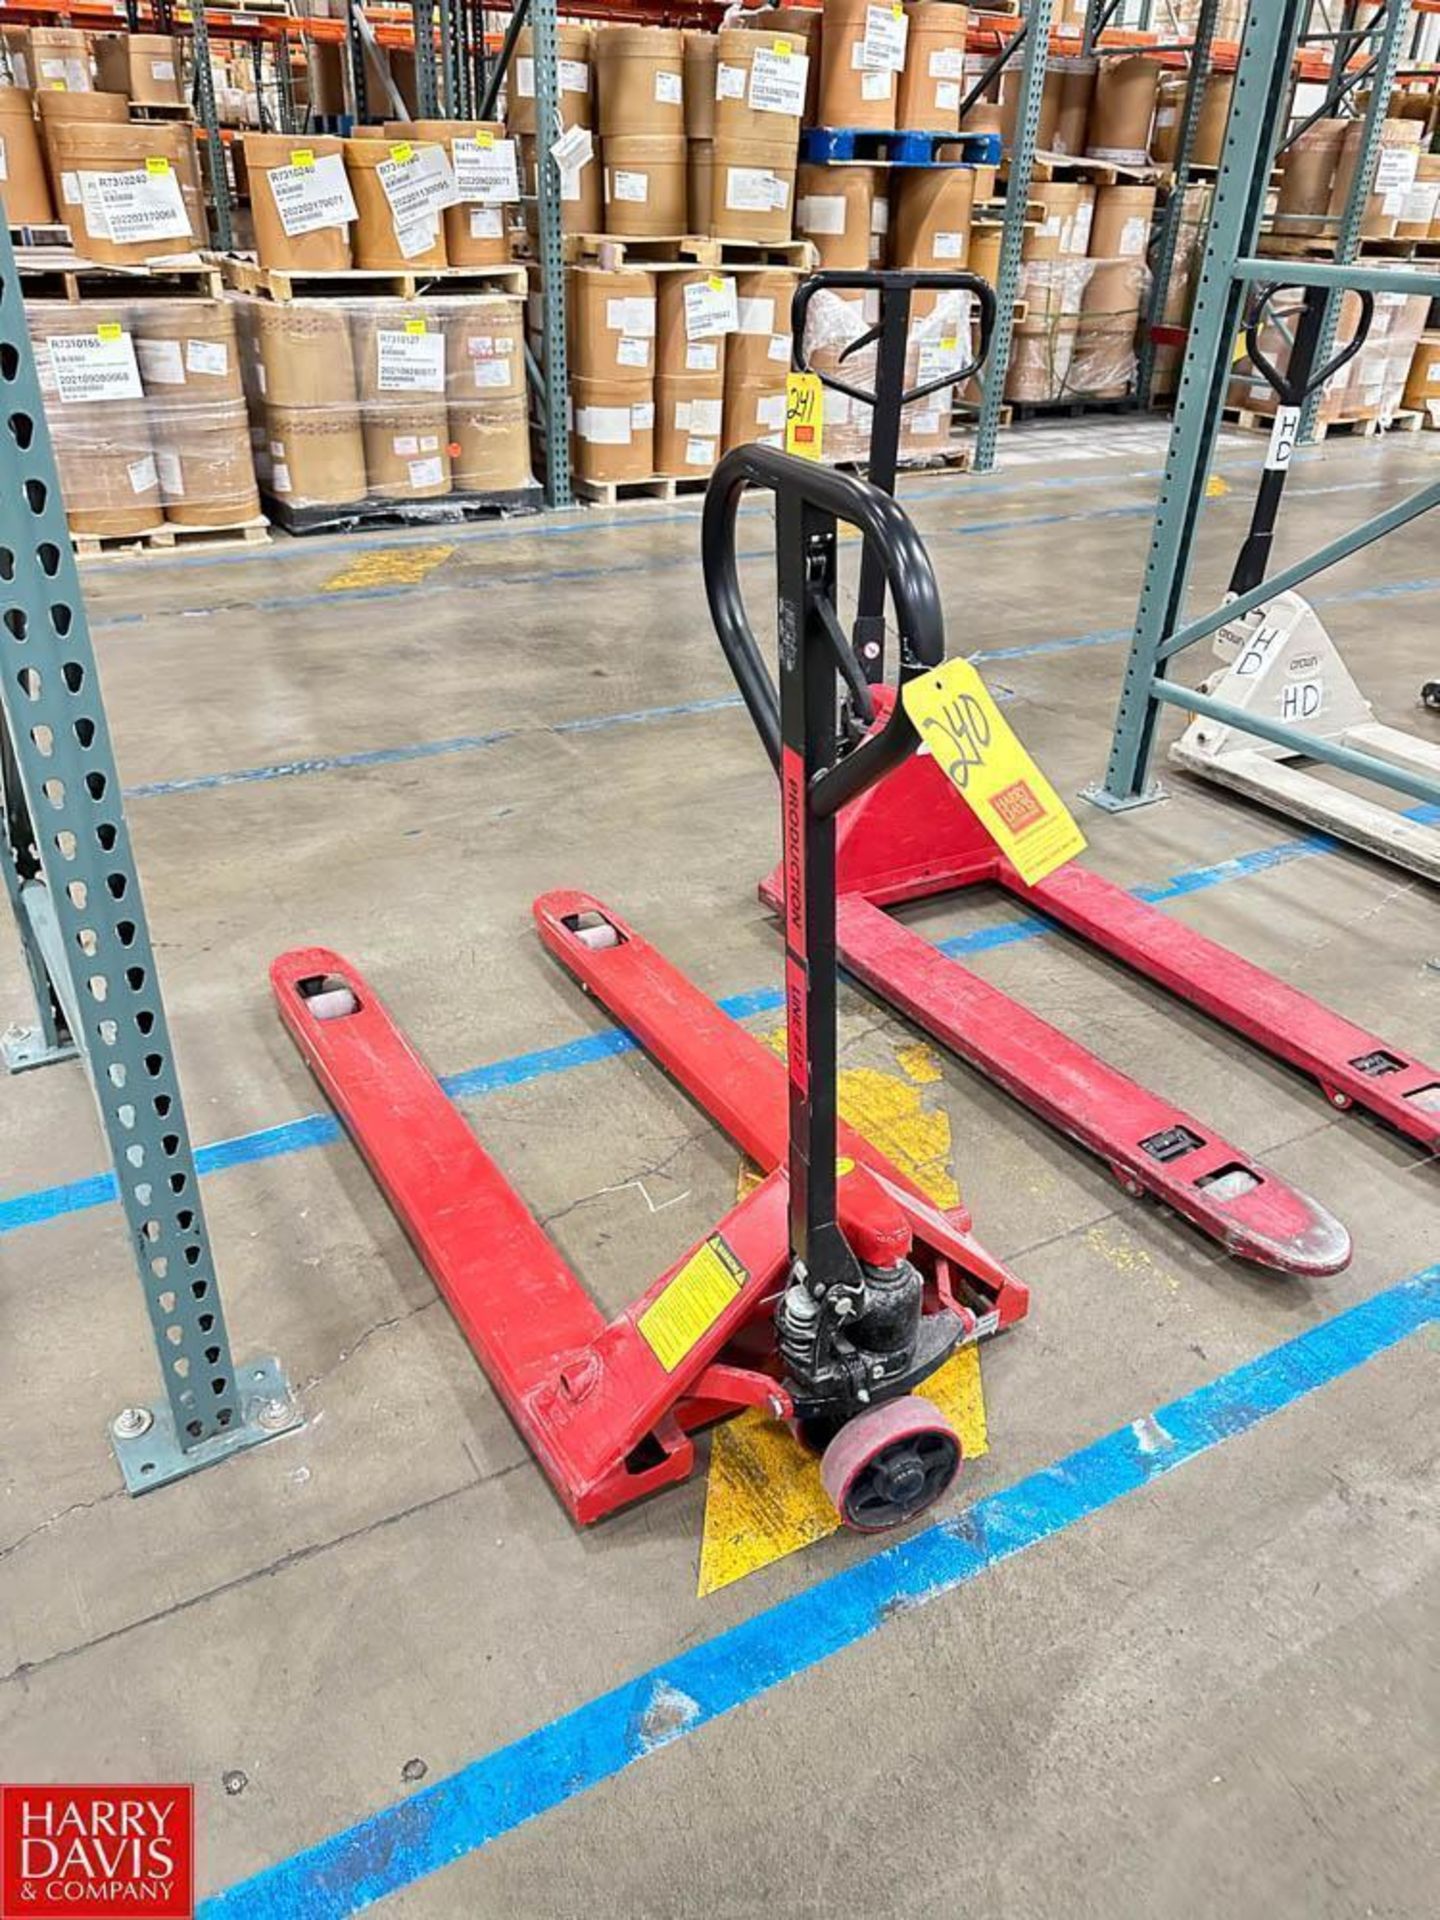 Global Hydraulic Pallet Jack - Rigging Fee: $20 - Image 2 of 2